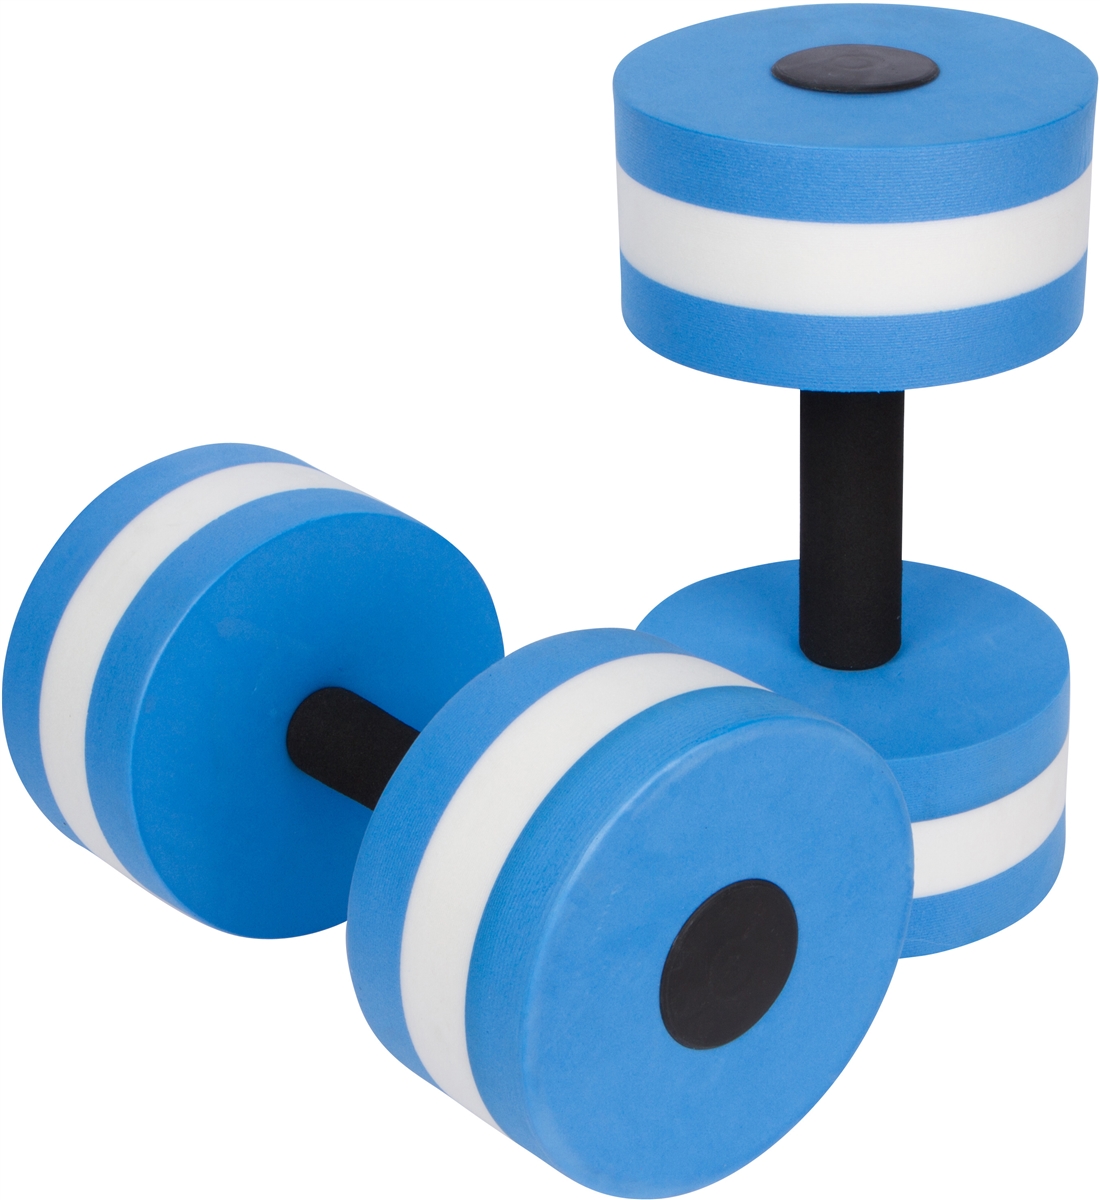 Aquatic Exercise Dumbells - Set of 2 - For Water Aerobics - By